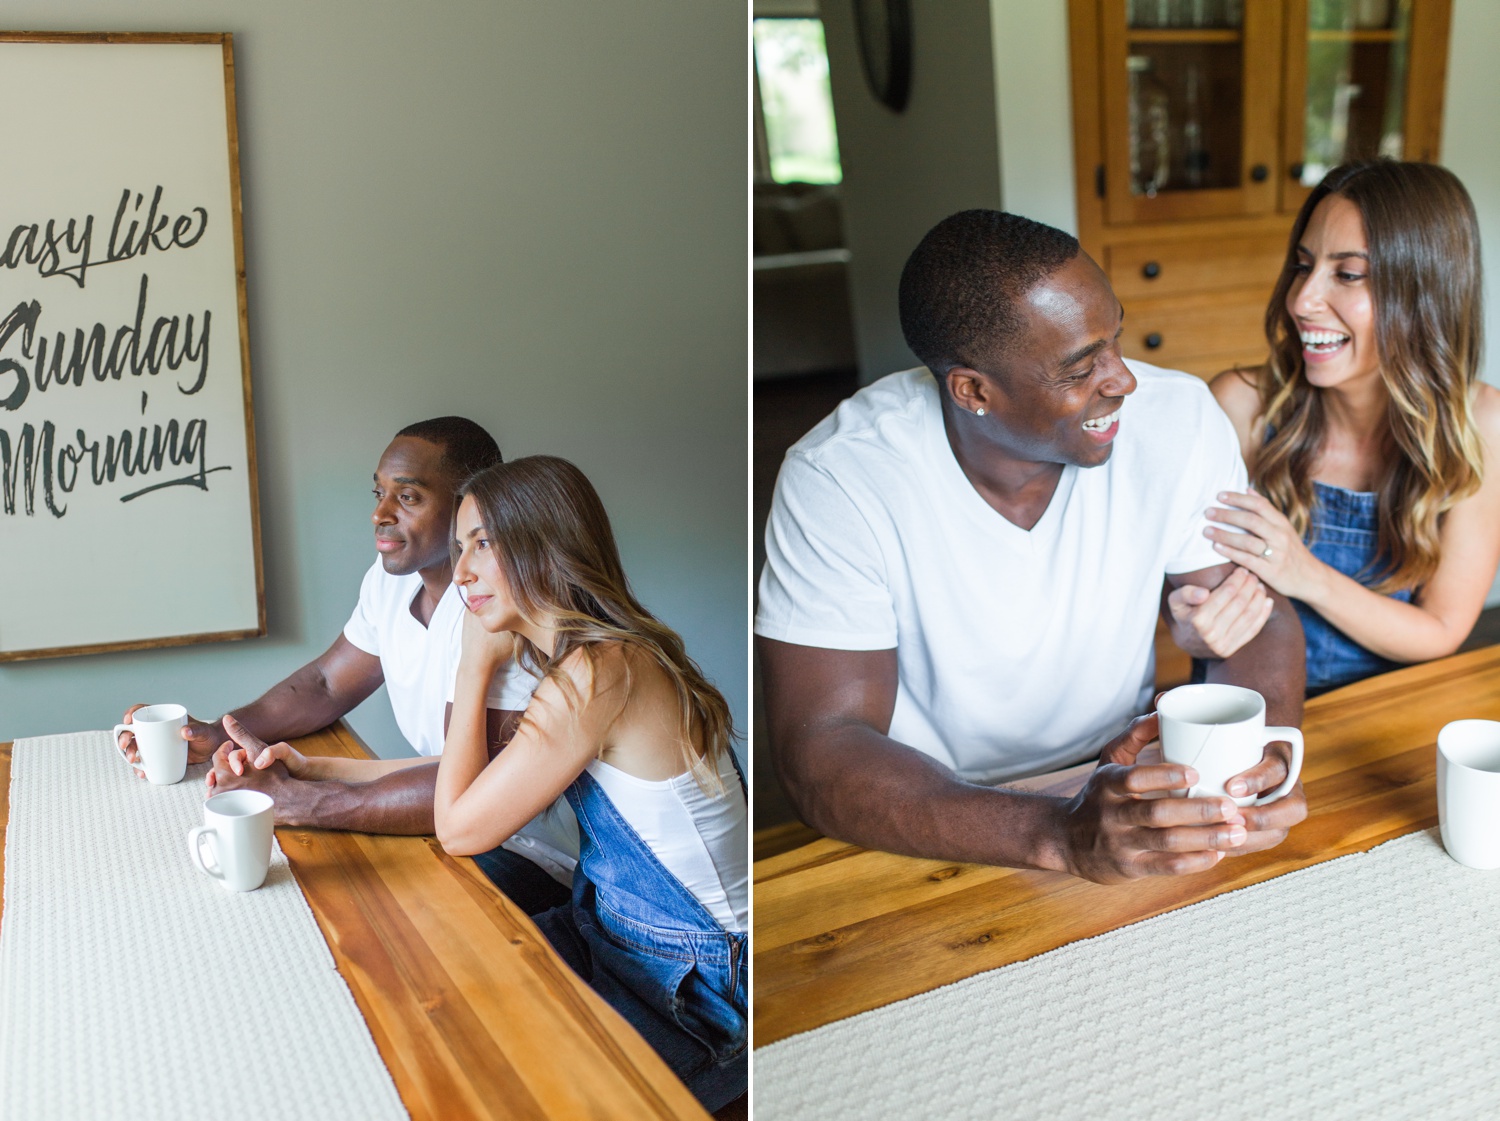 fishkill-hudson-valley-ny-home-engagement-session-top-ct-nyc-destination-wedding-photographer-shaina-lee-photography-photo